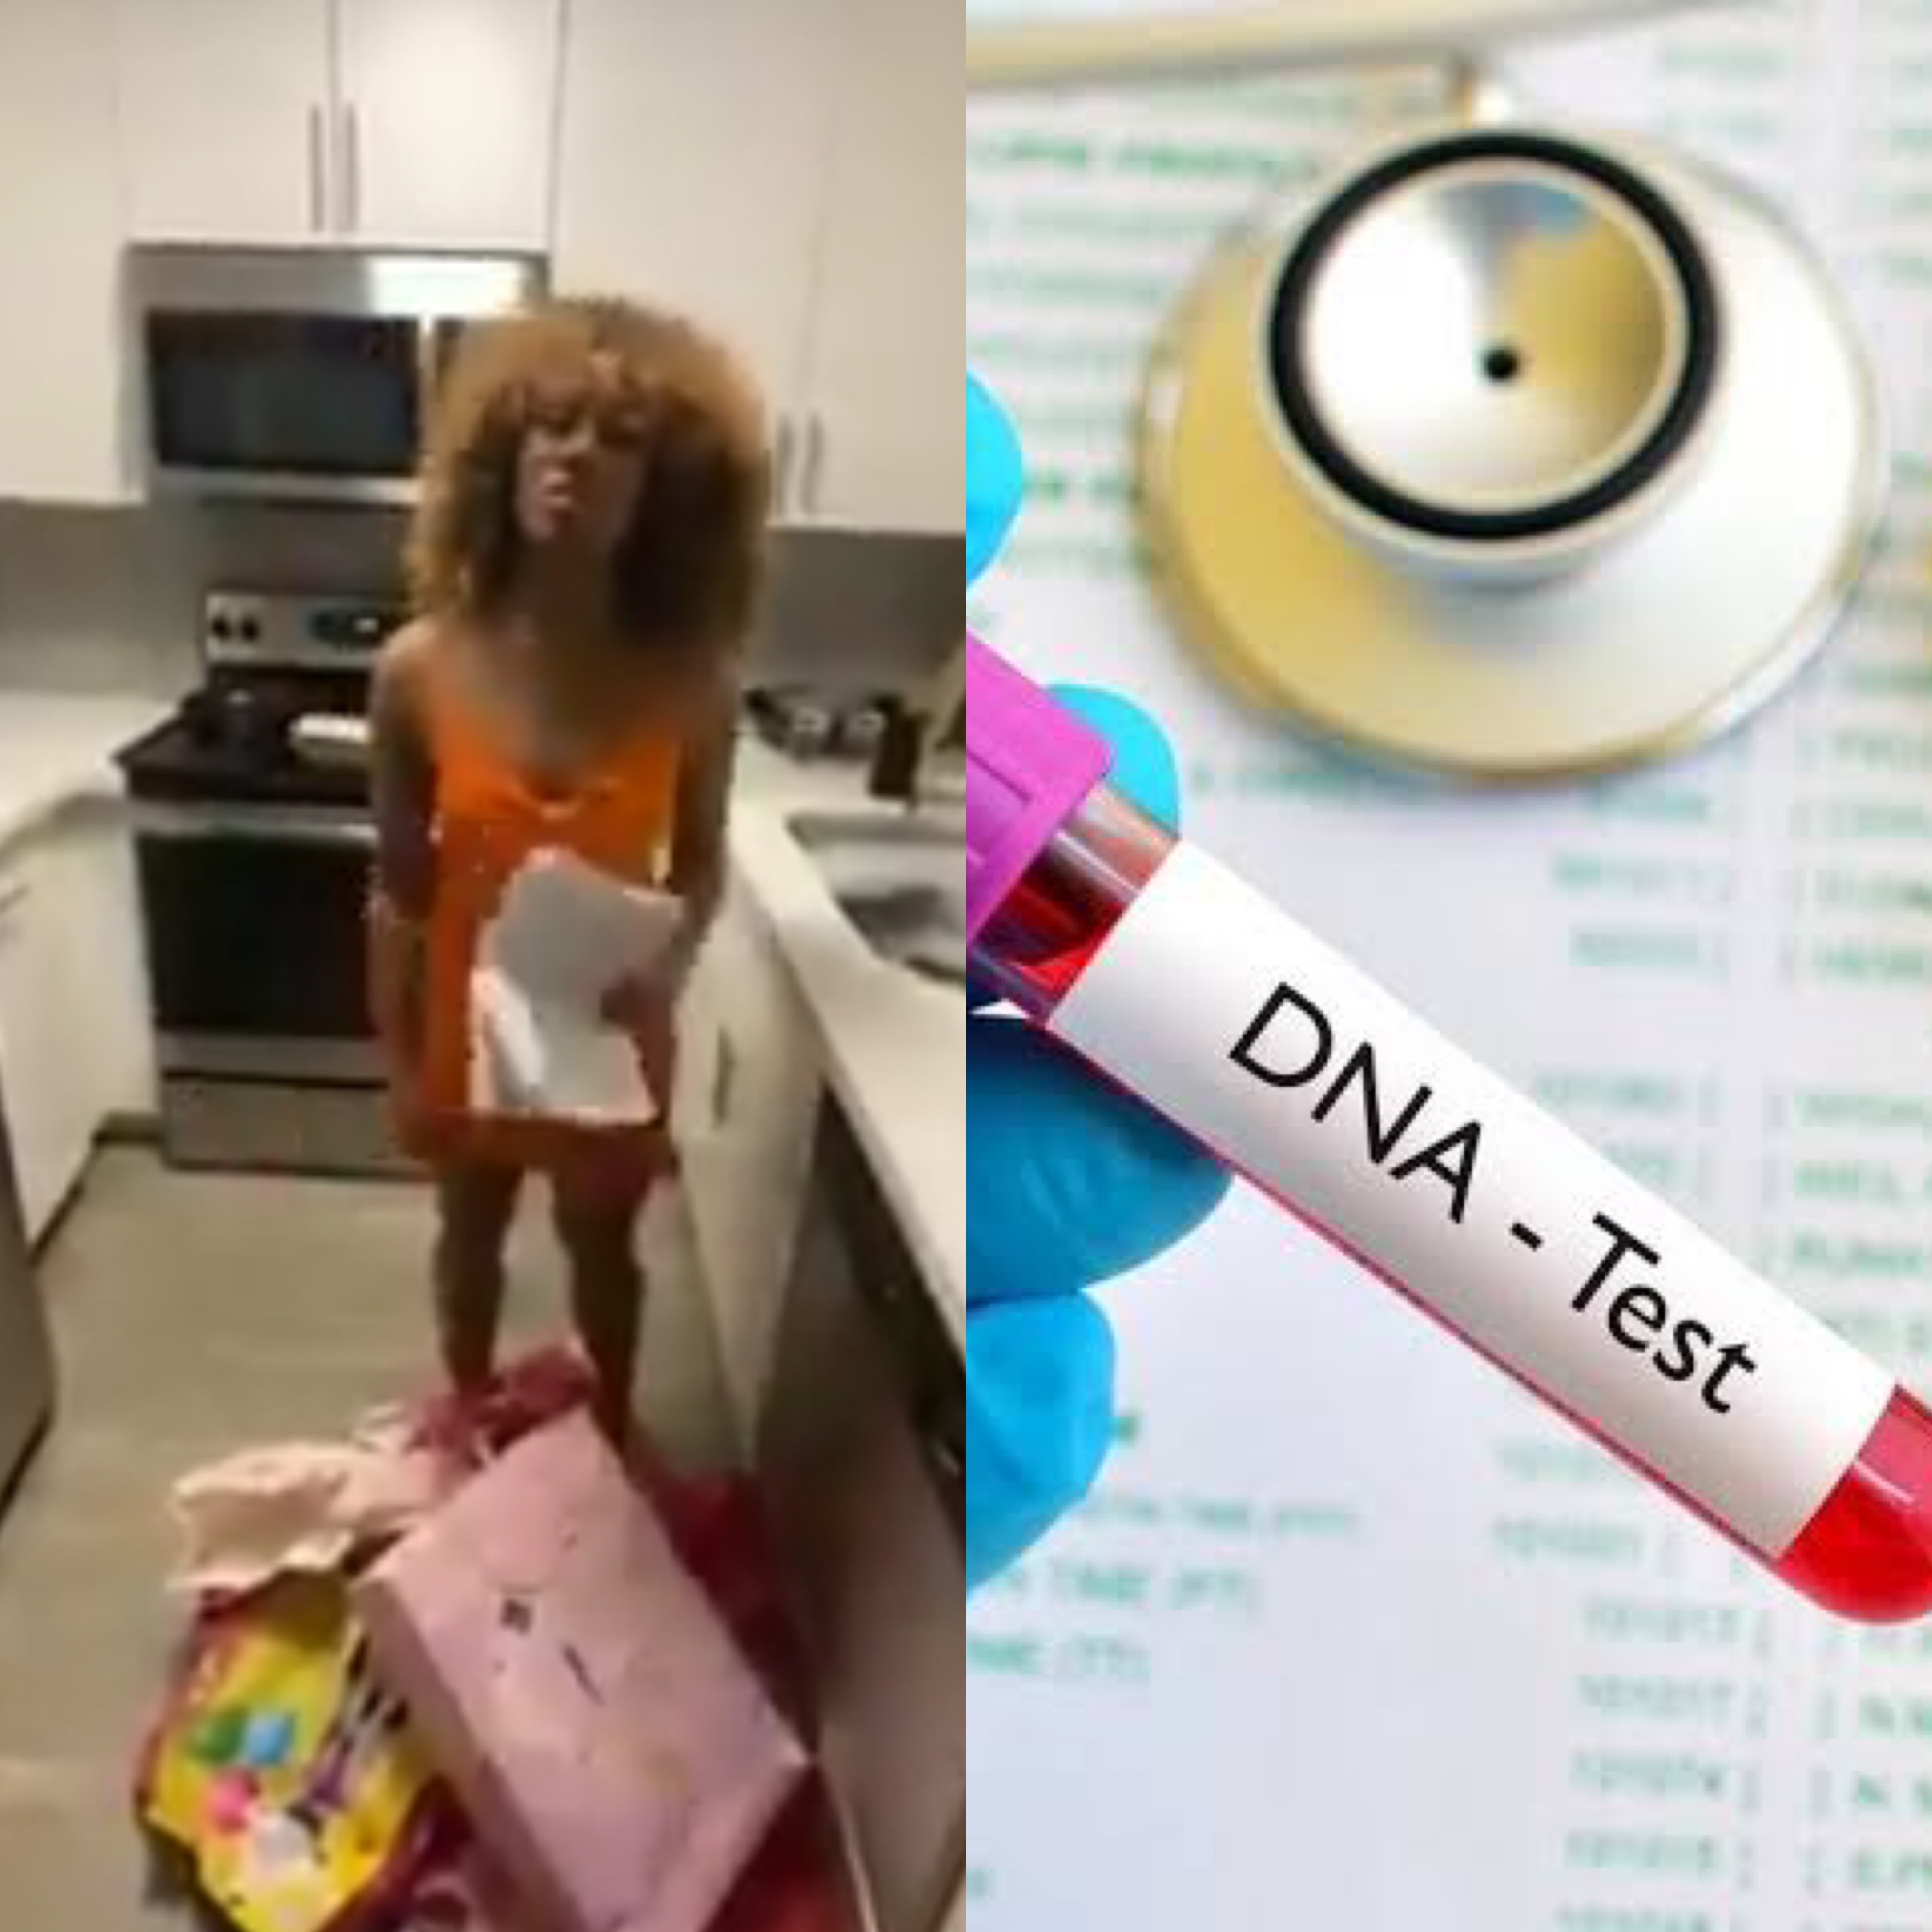 Fear Women: Staged DNA Test Video Sparks Reactions